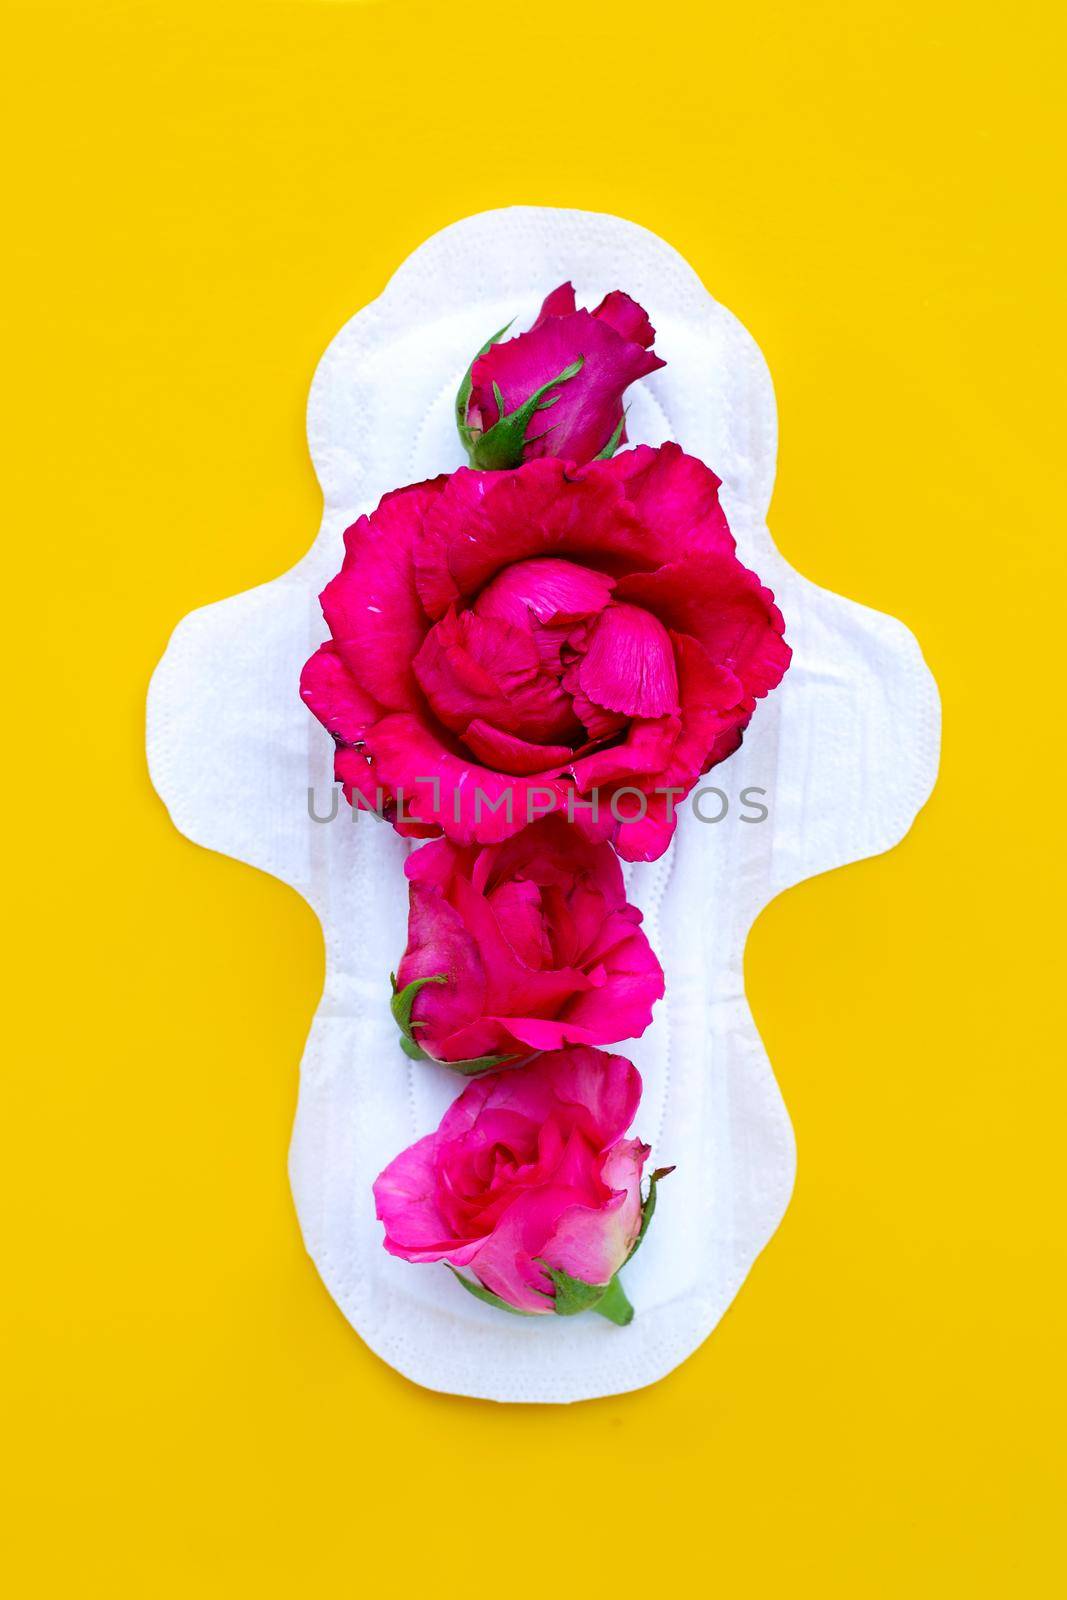 White sanitary napkin with red roses on yellow background.  by Bowonpat